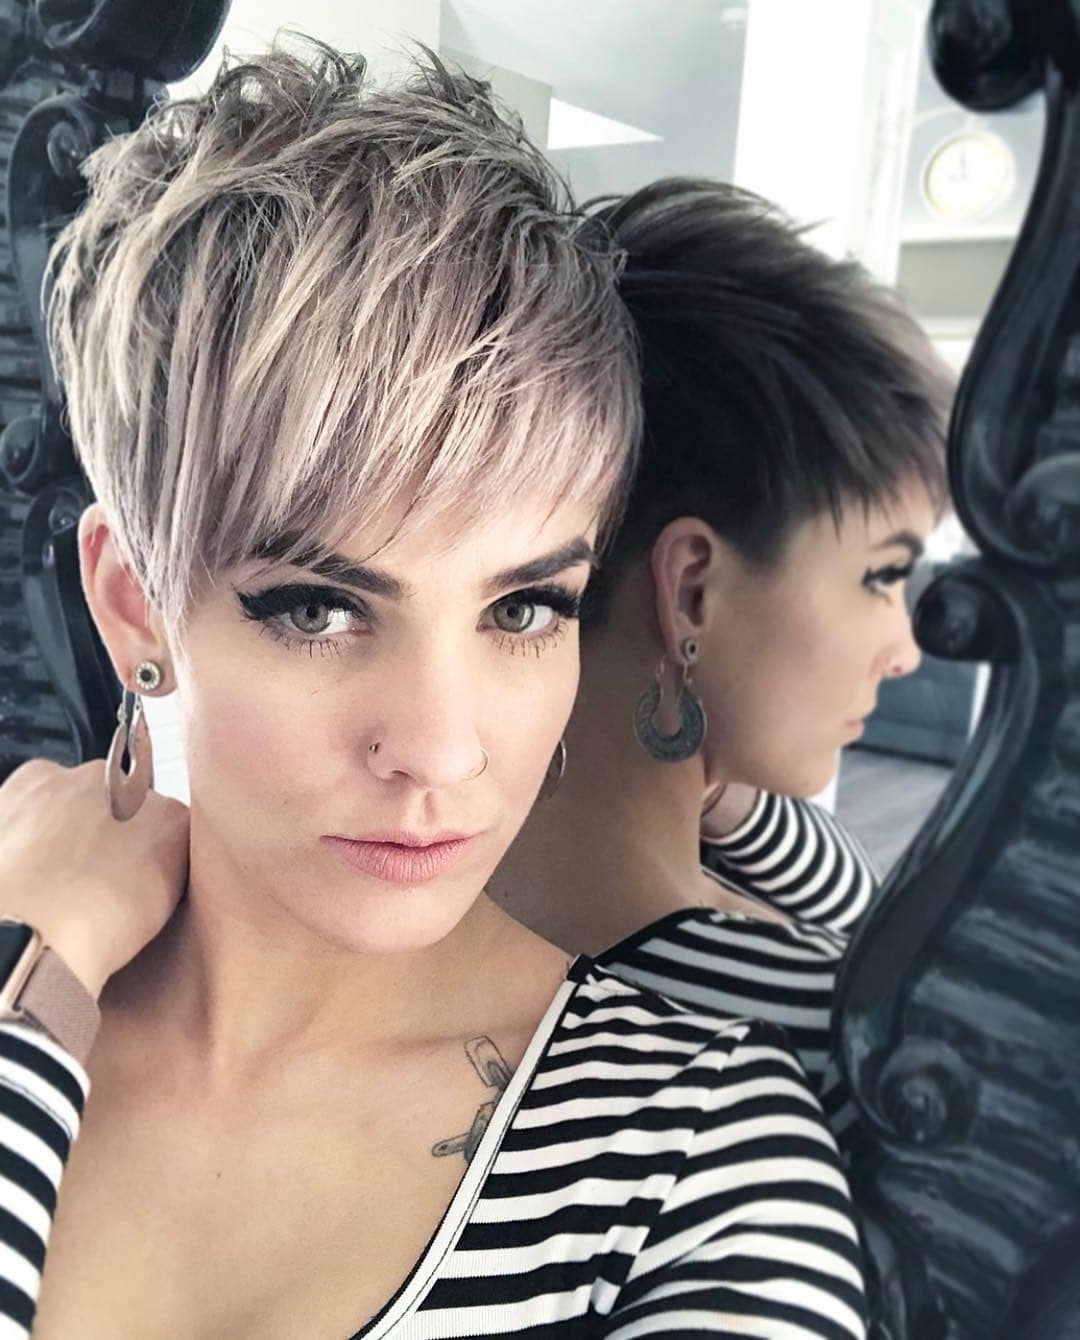 Top 10 Most Flattering Pixie Haircuts For Women, Short Hair Pertaining To Most Recent Edgy Messy Pixie Haircuts (View 7 of 20)